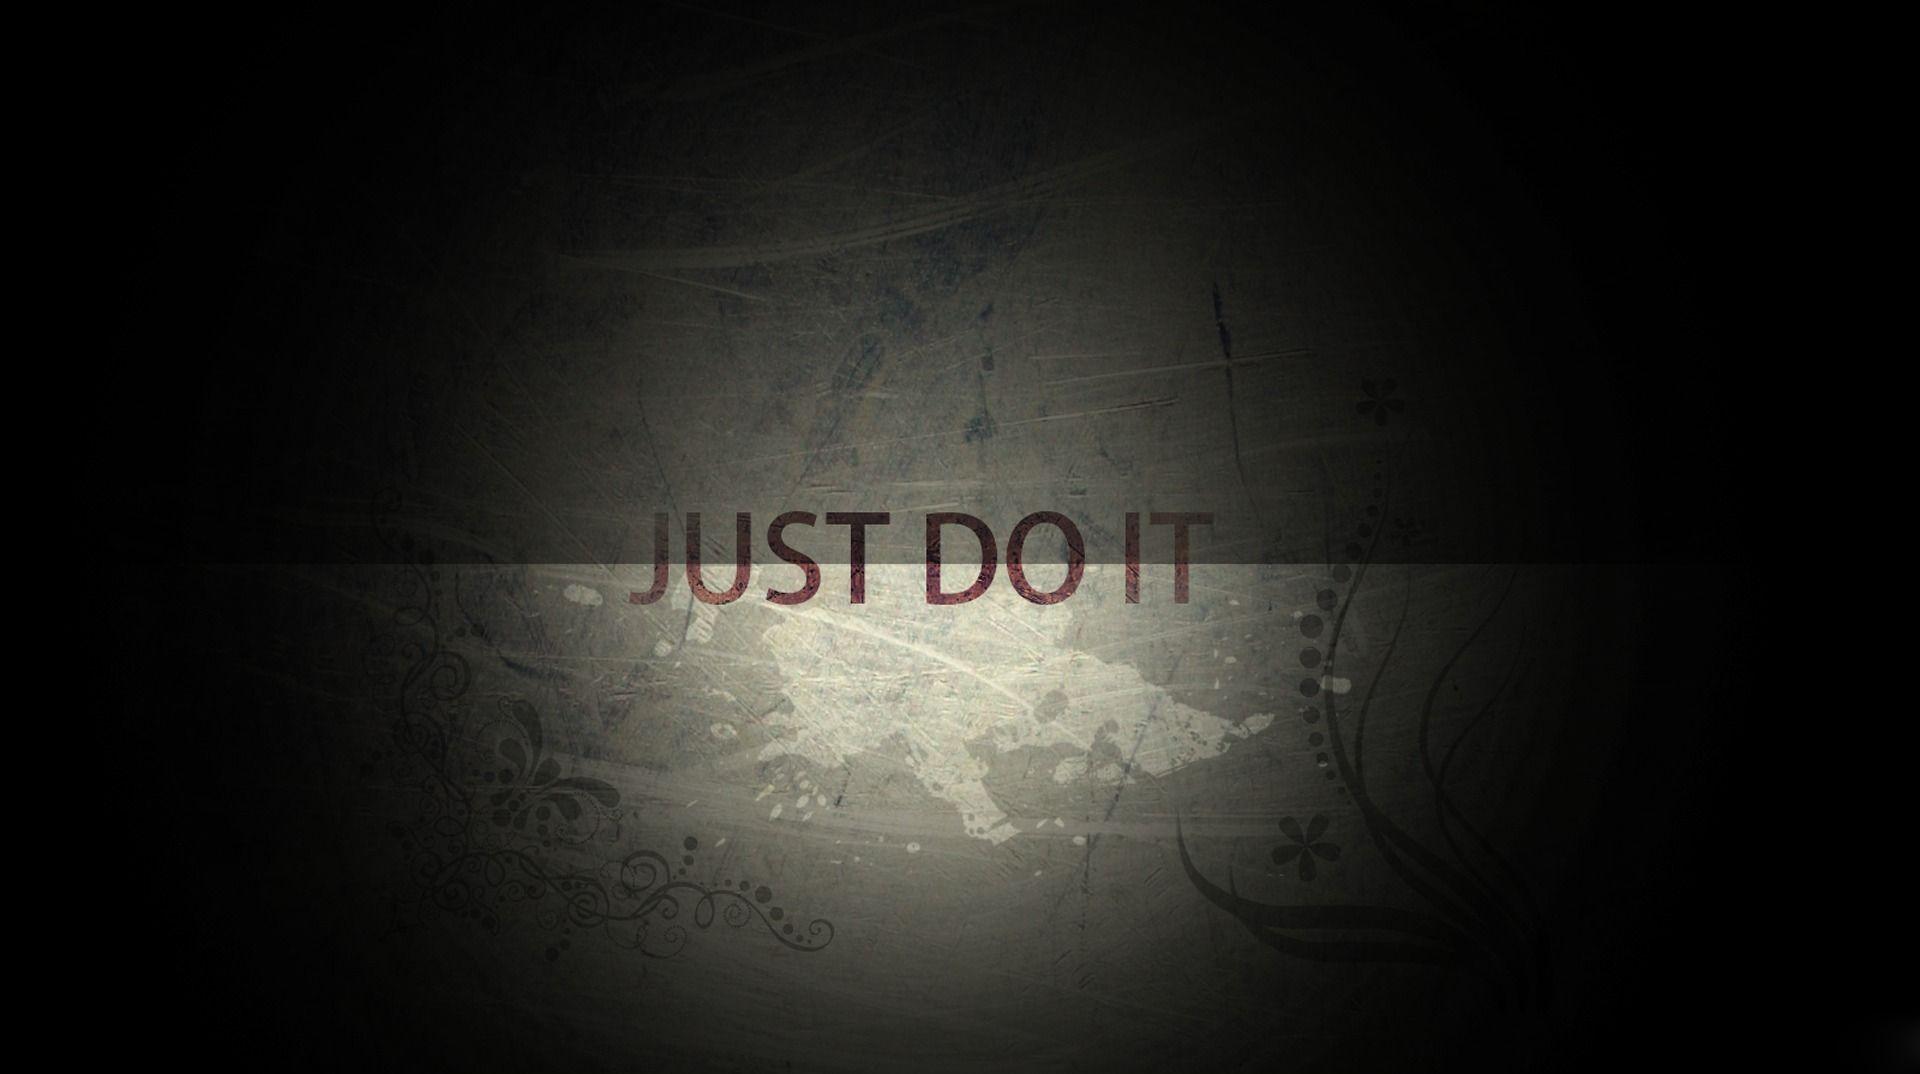 Wallpaper.wiki Just Do It Nike Motivational Quote Wallpaper Hd PIC